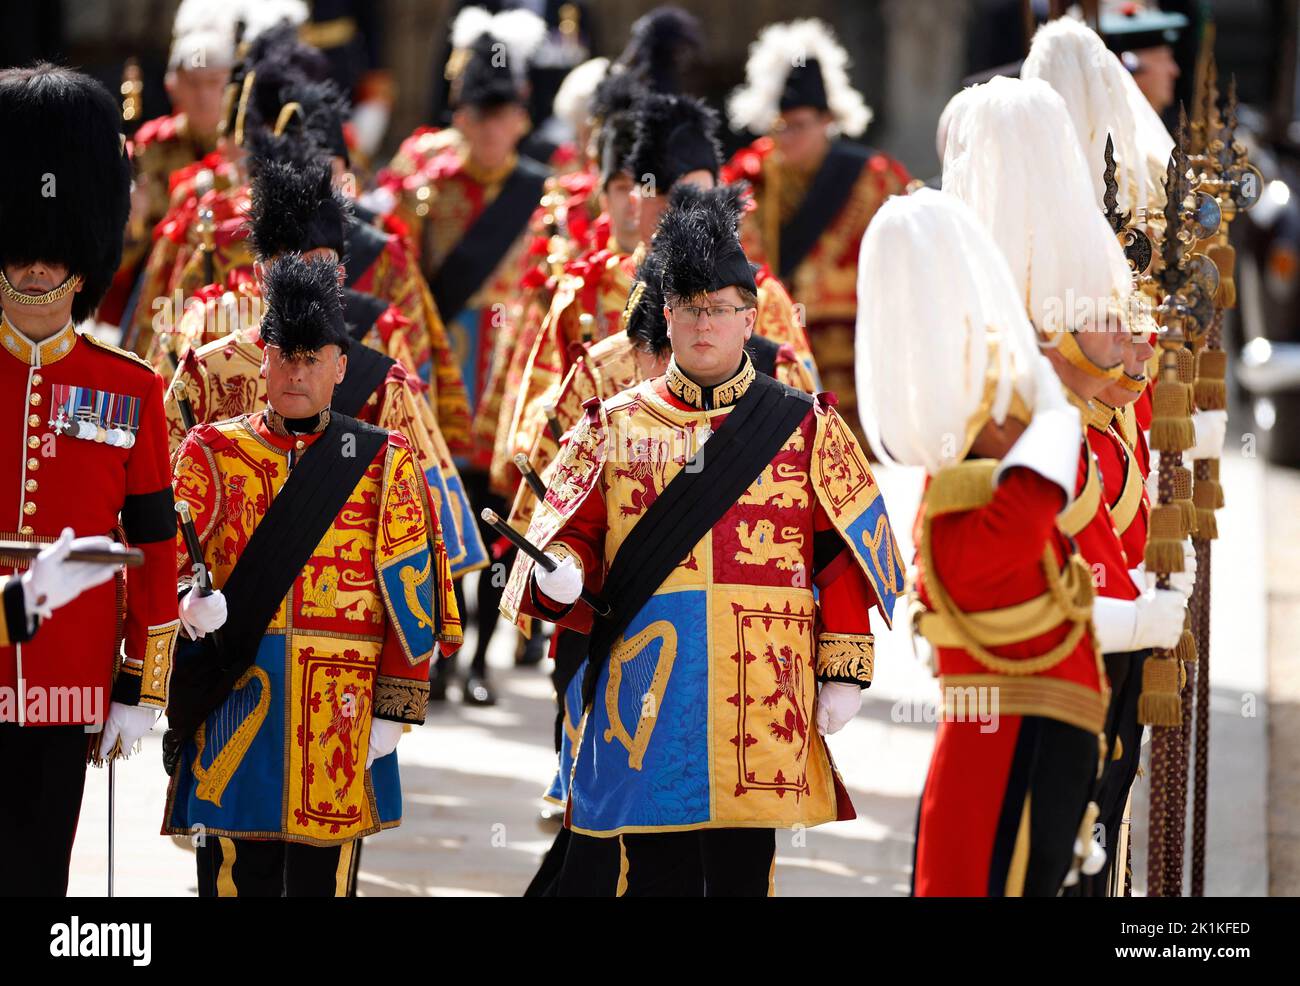 Kings, Heralds, and Pursuivants of arms, on the day of the state funeral and burial of Britain's Queen Elizabeth, in London, Britain, September 19, 2022 REUTERS/John Sibley Stock Photo